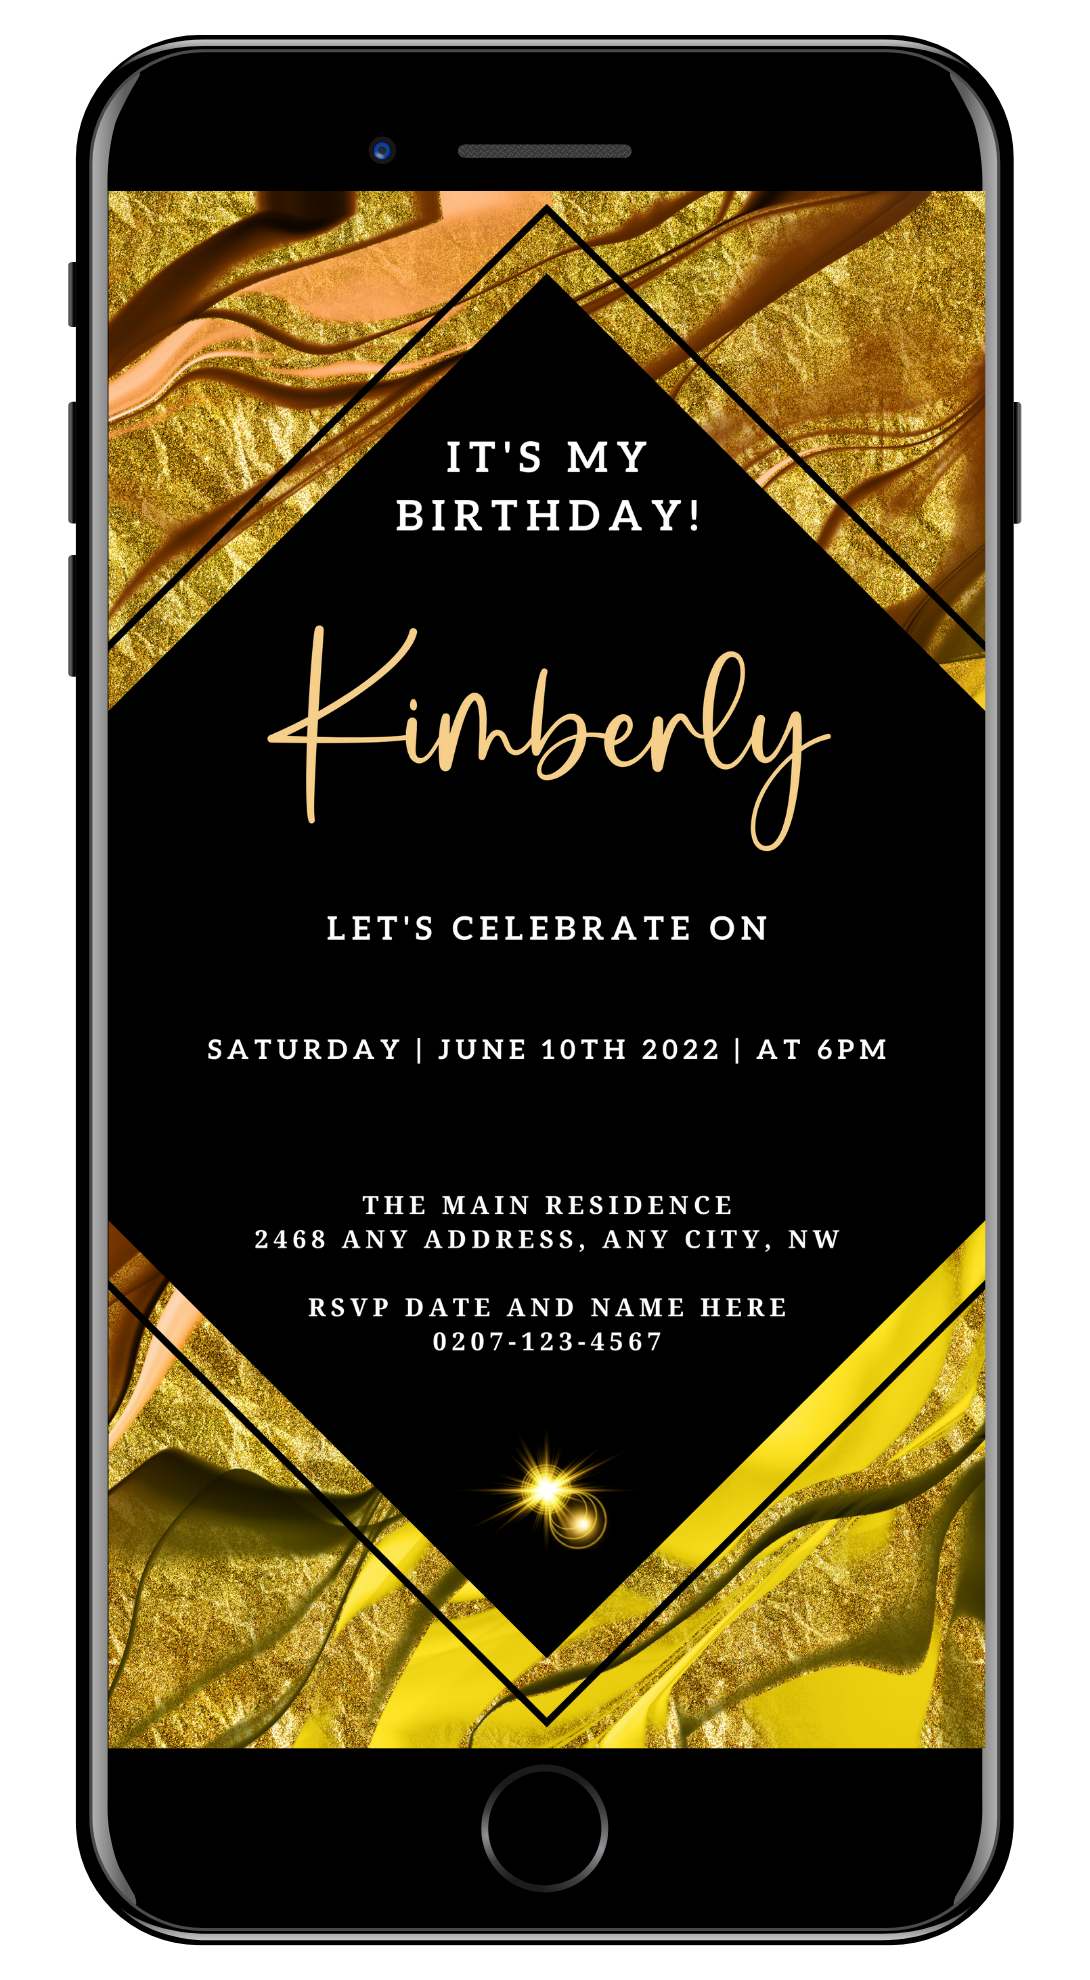 Gold Black Ankara | Editable Birthday Evite with customizable text, available for instant download and personalization via Canva on PC, Tablet, or Mobile Device.